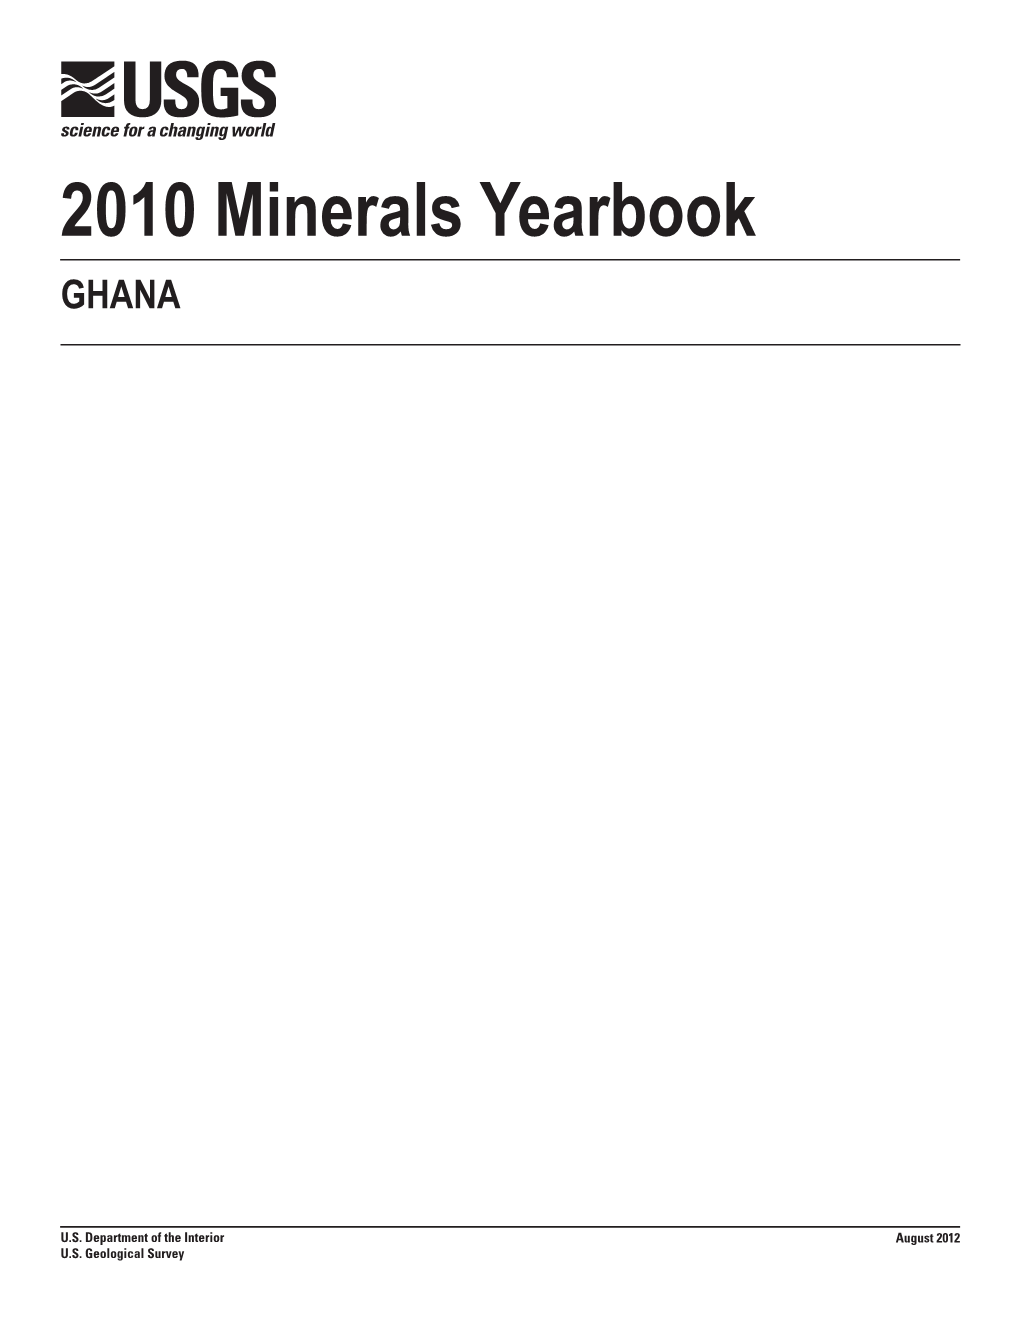 The Mineral Industry of Ghana in 2010